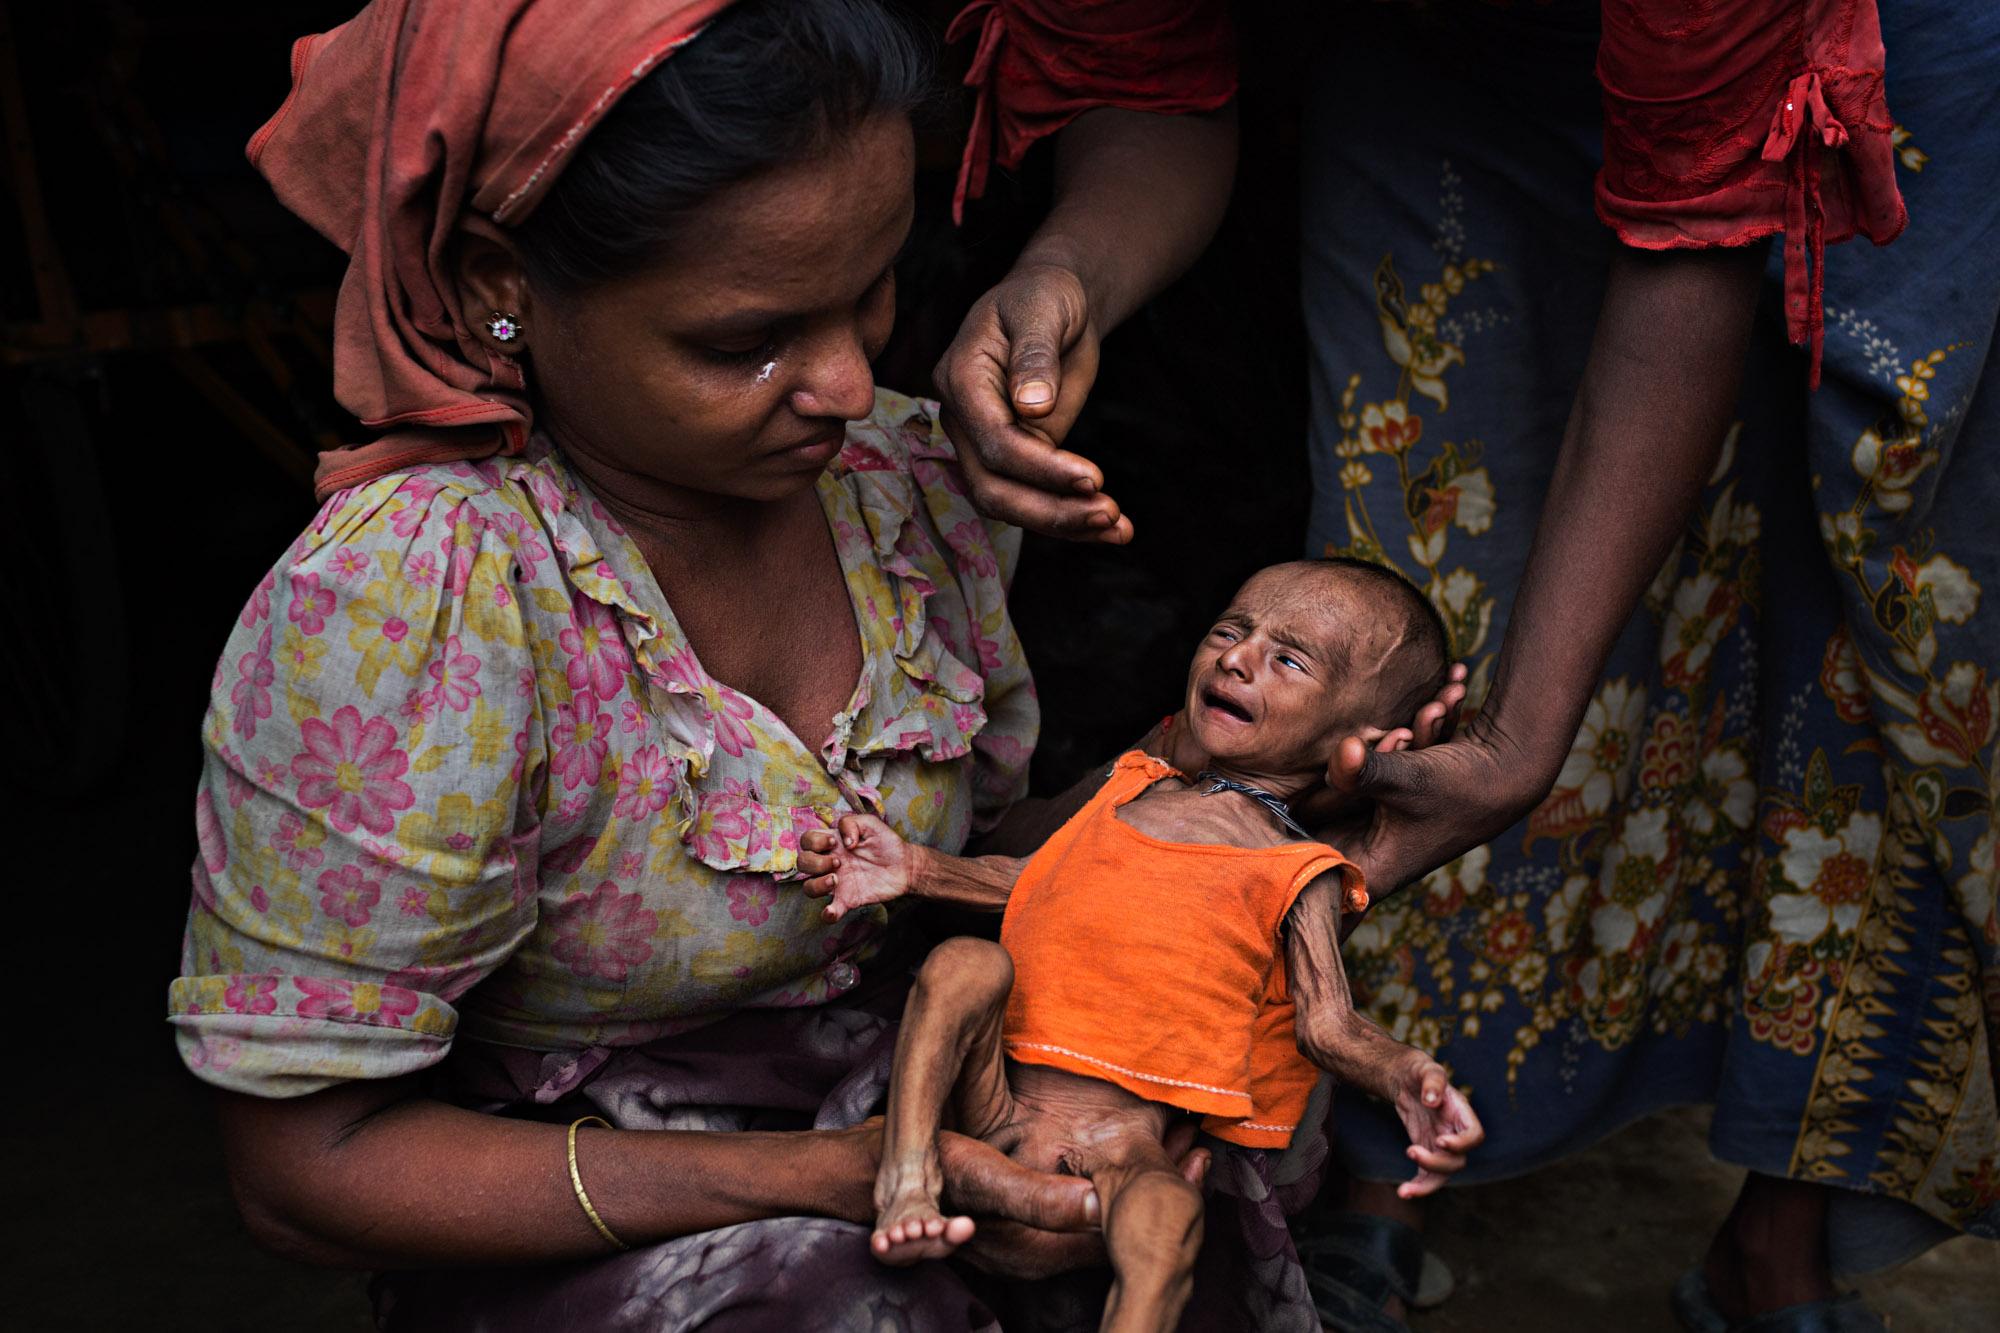  A Rohingya woman cries while holding her severely malnourished child in a refugee camp in Sittwe, Myanmar, May 2014. At this time, the Myanmar...